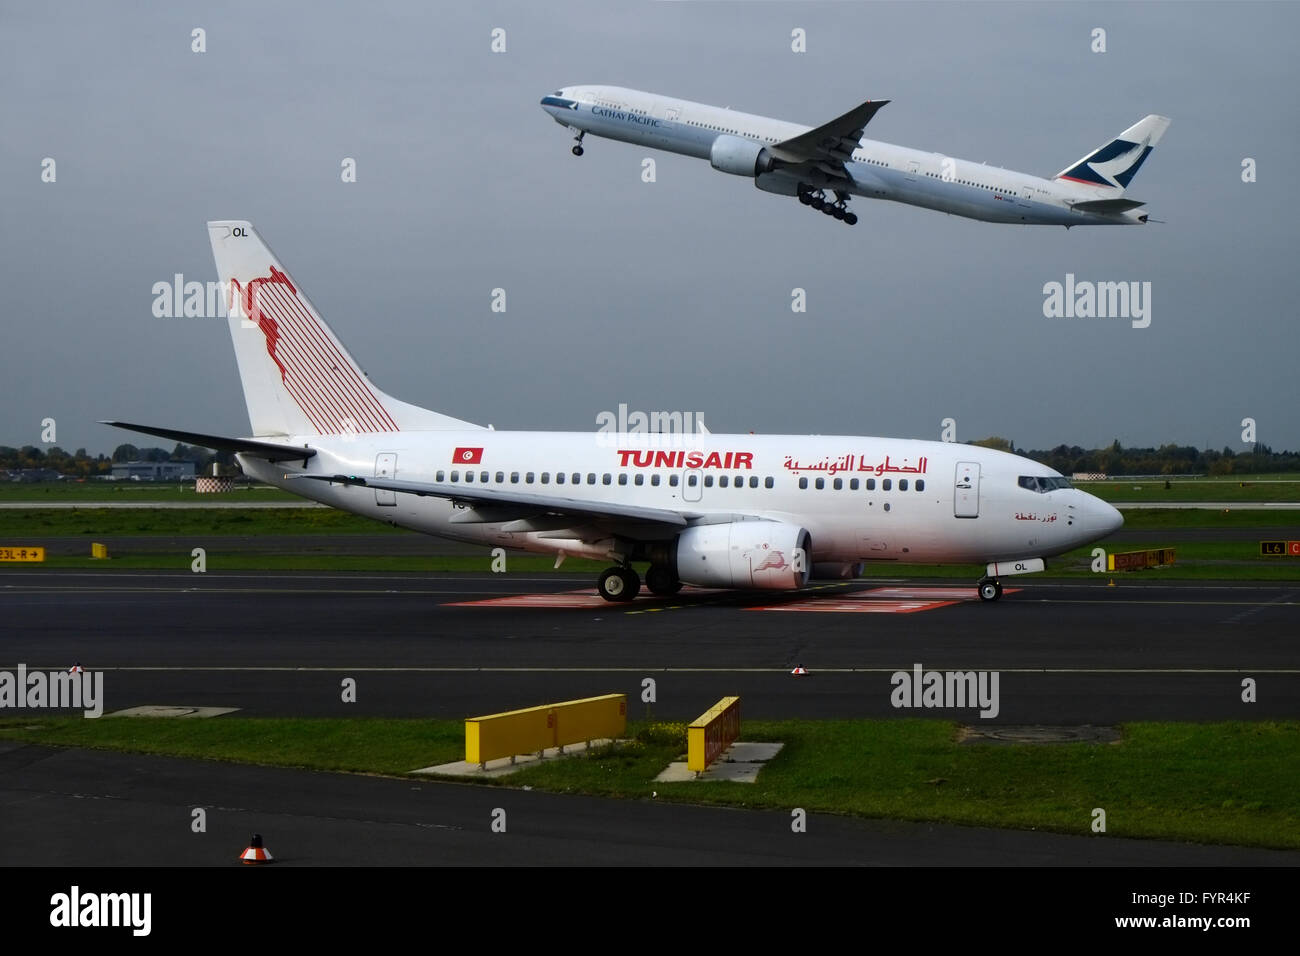 Two airliners Stock Photo